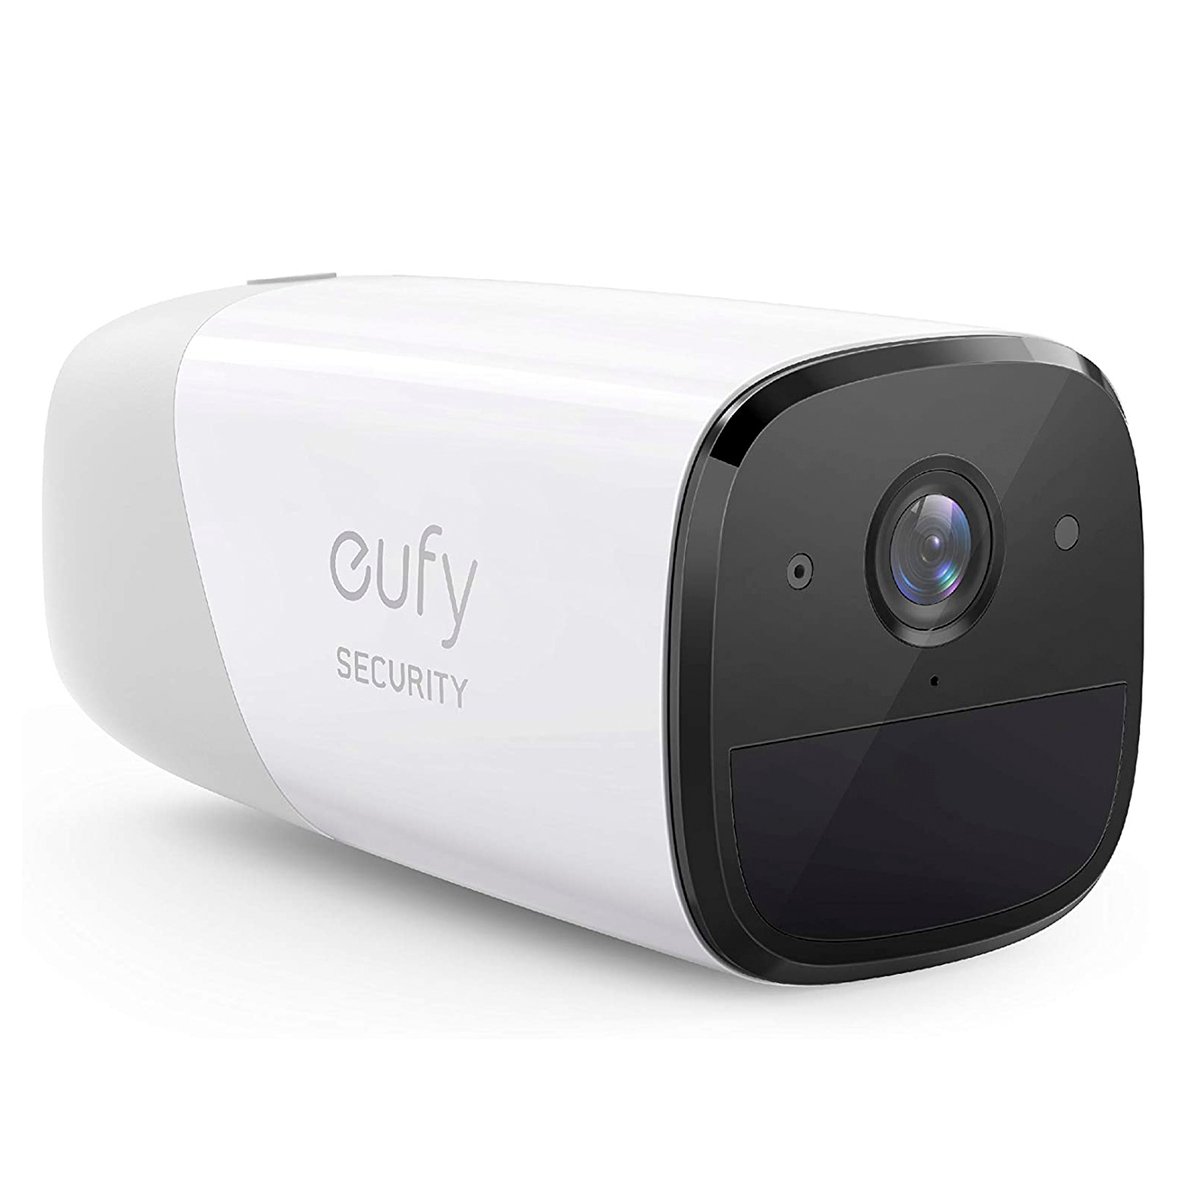 Eufy T81401D1 Security eufyCam 2 Wireless Home Security Add-on Camera